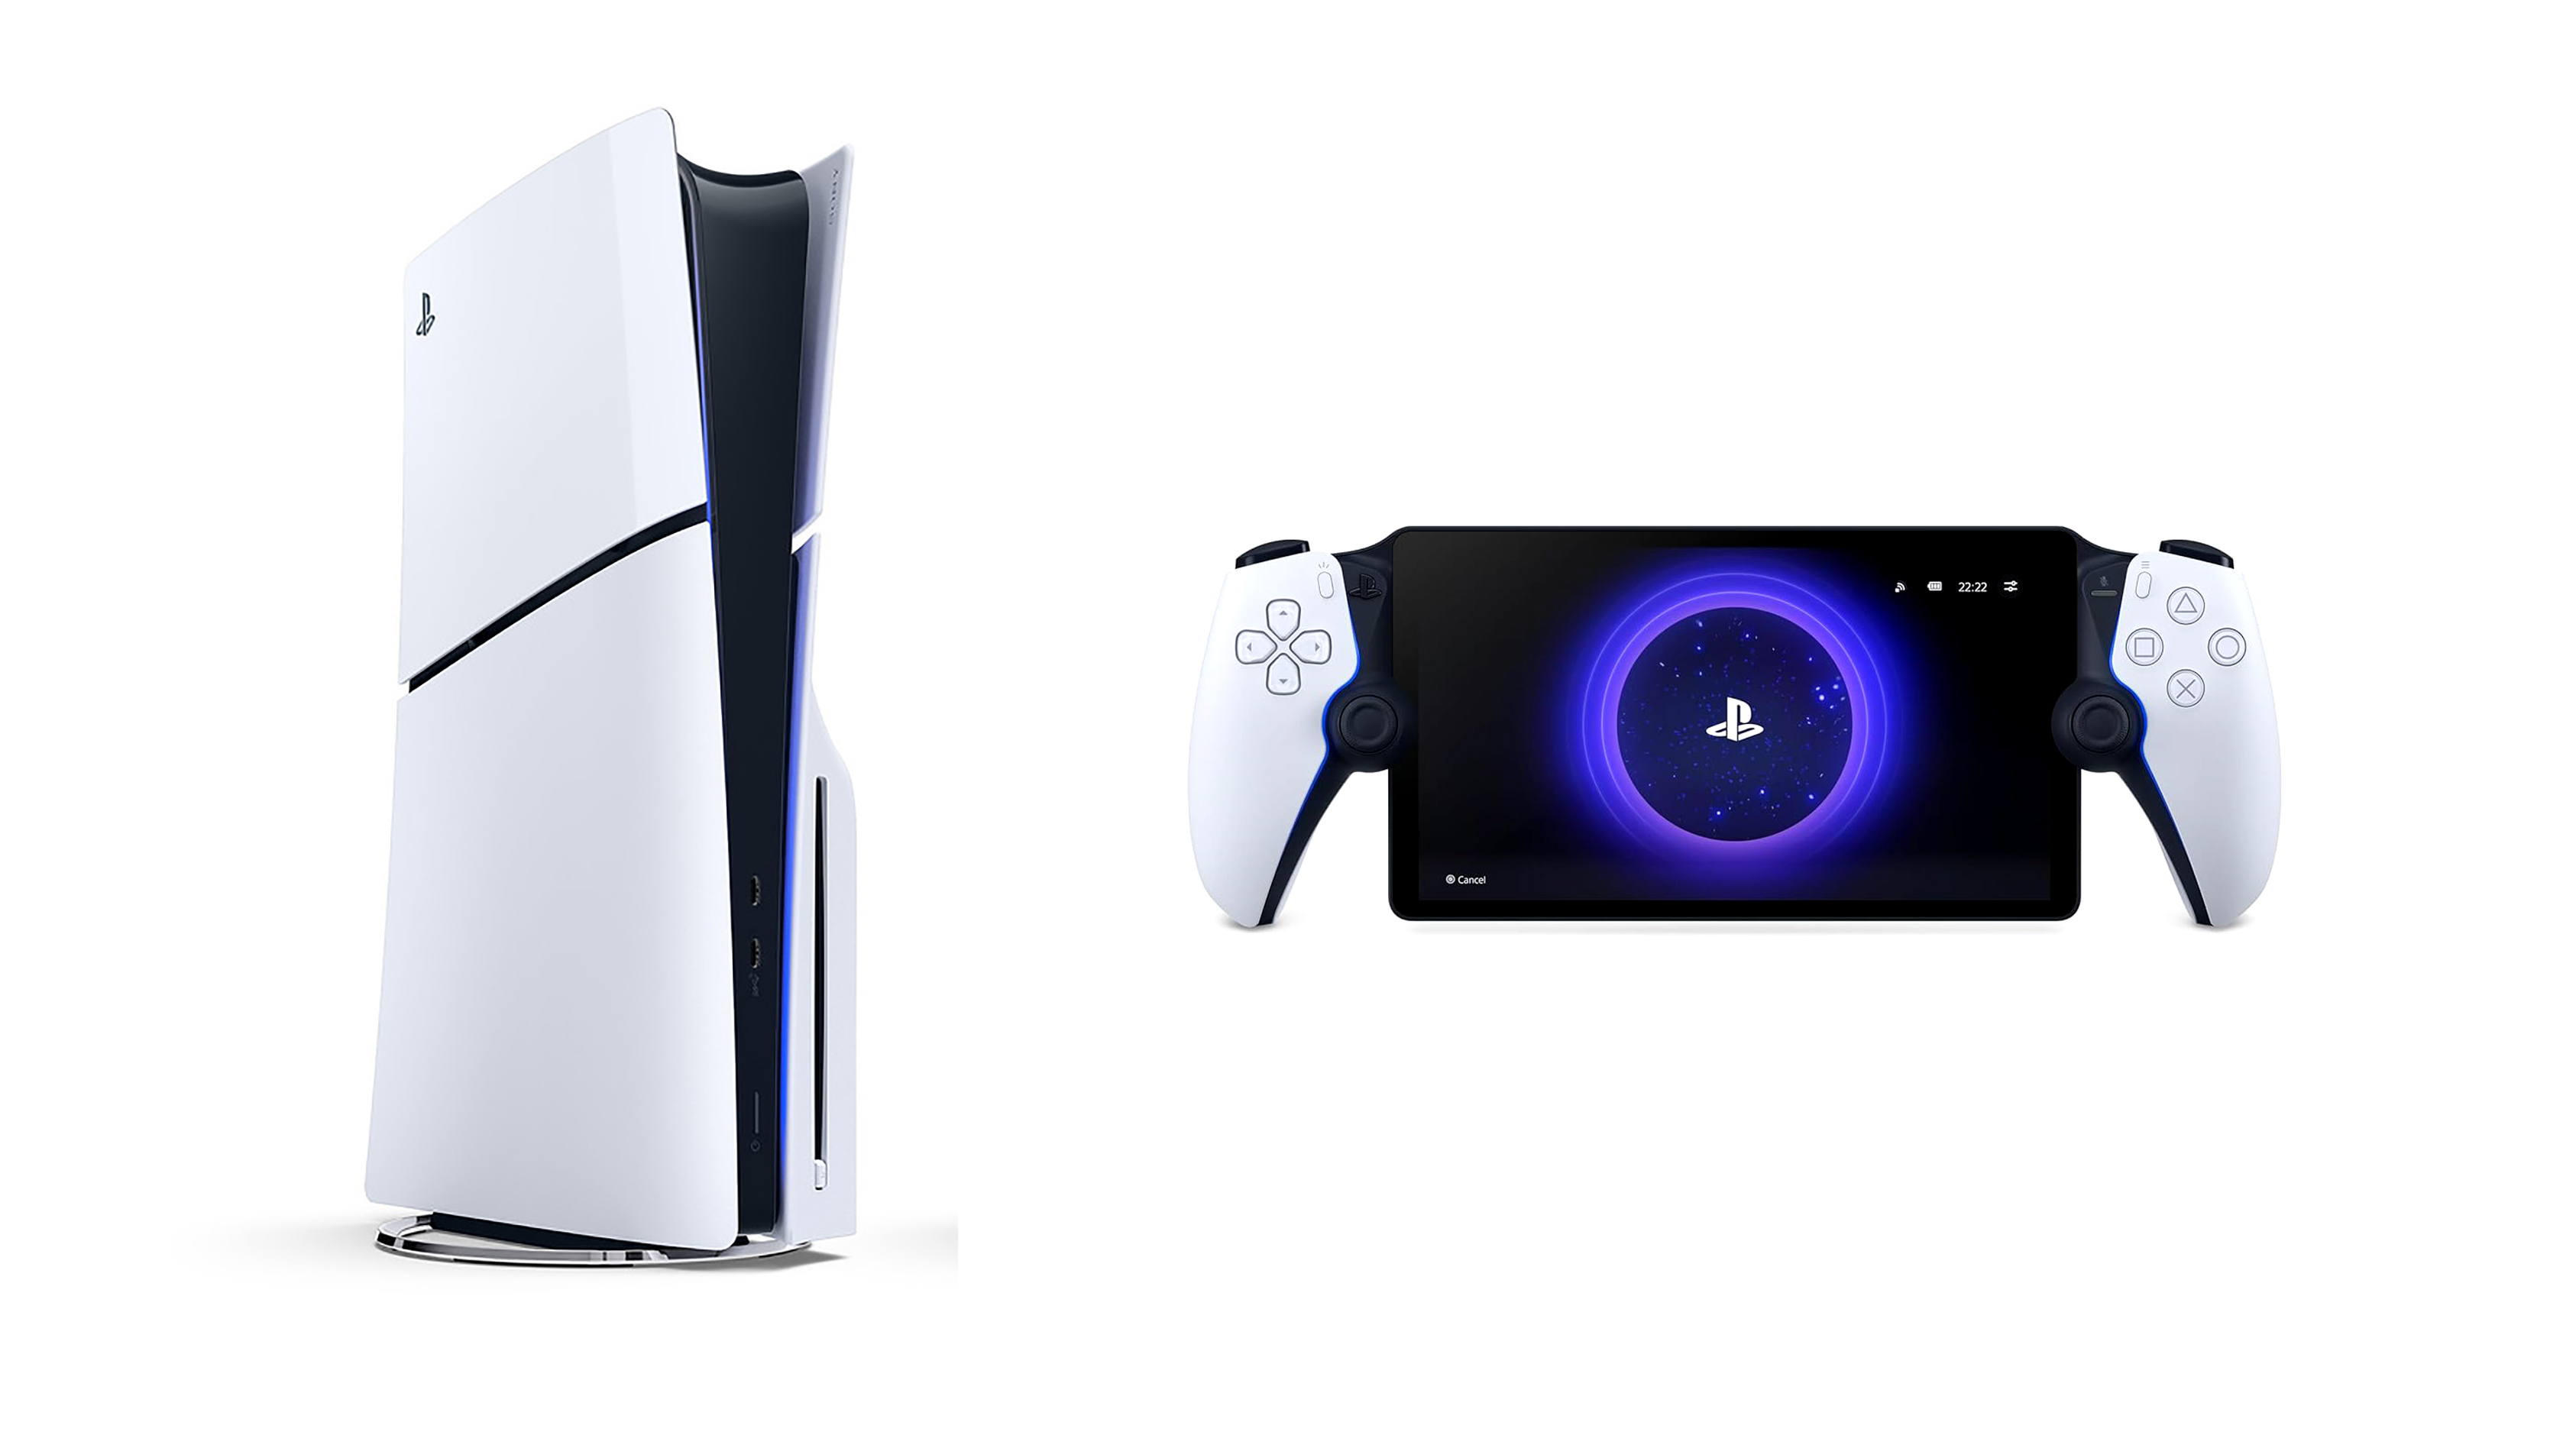 PlayStation Portal Remote Player Launches on Nov. 15; Handheld  Game-Streaming Device for PS5 Games - The Japan News